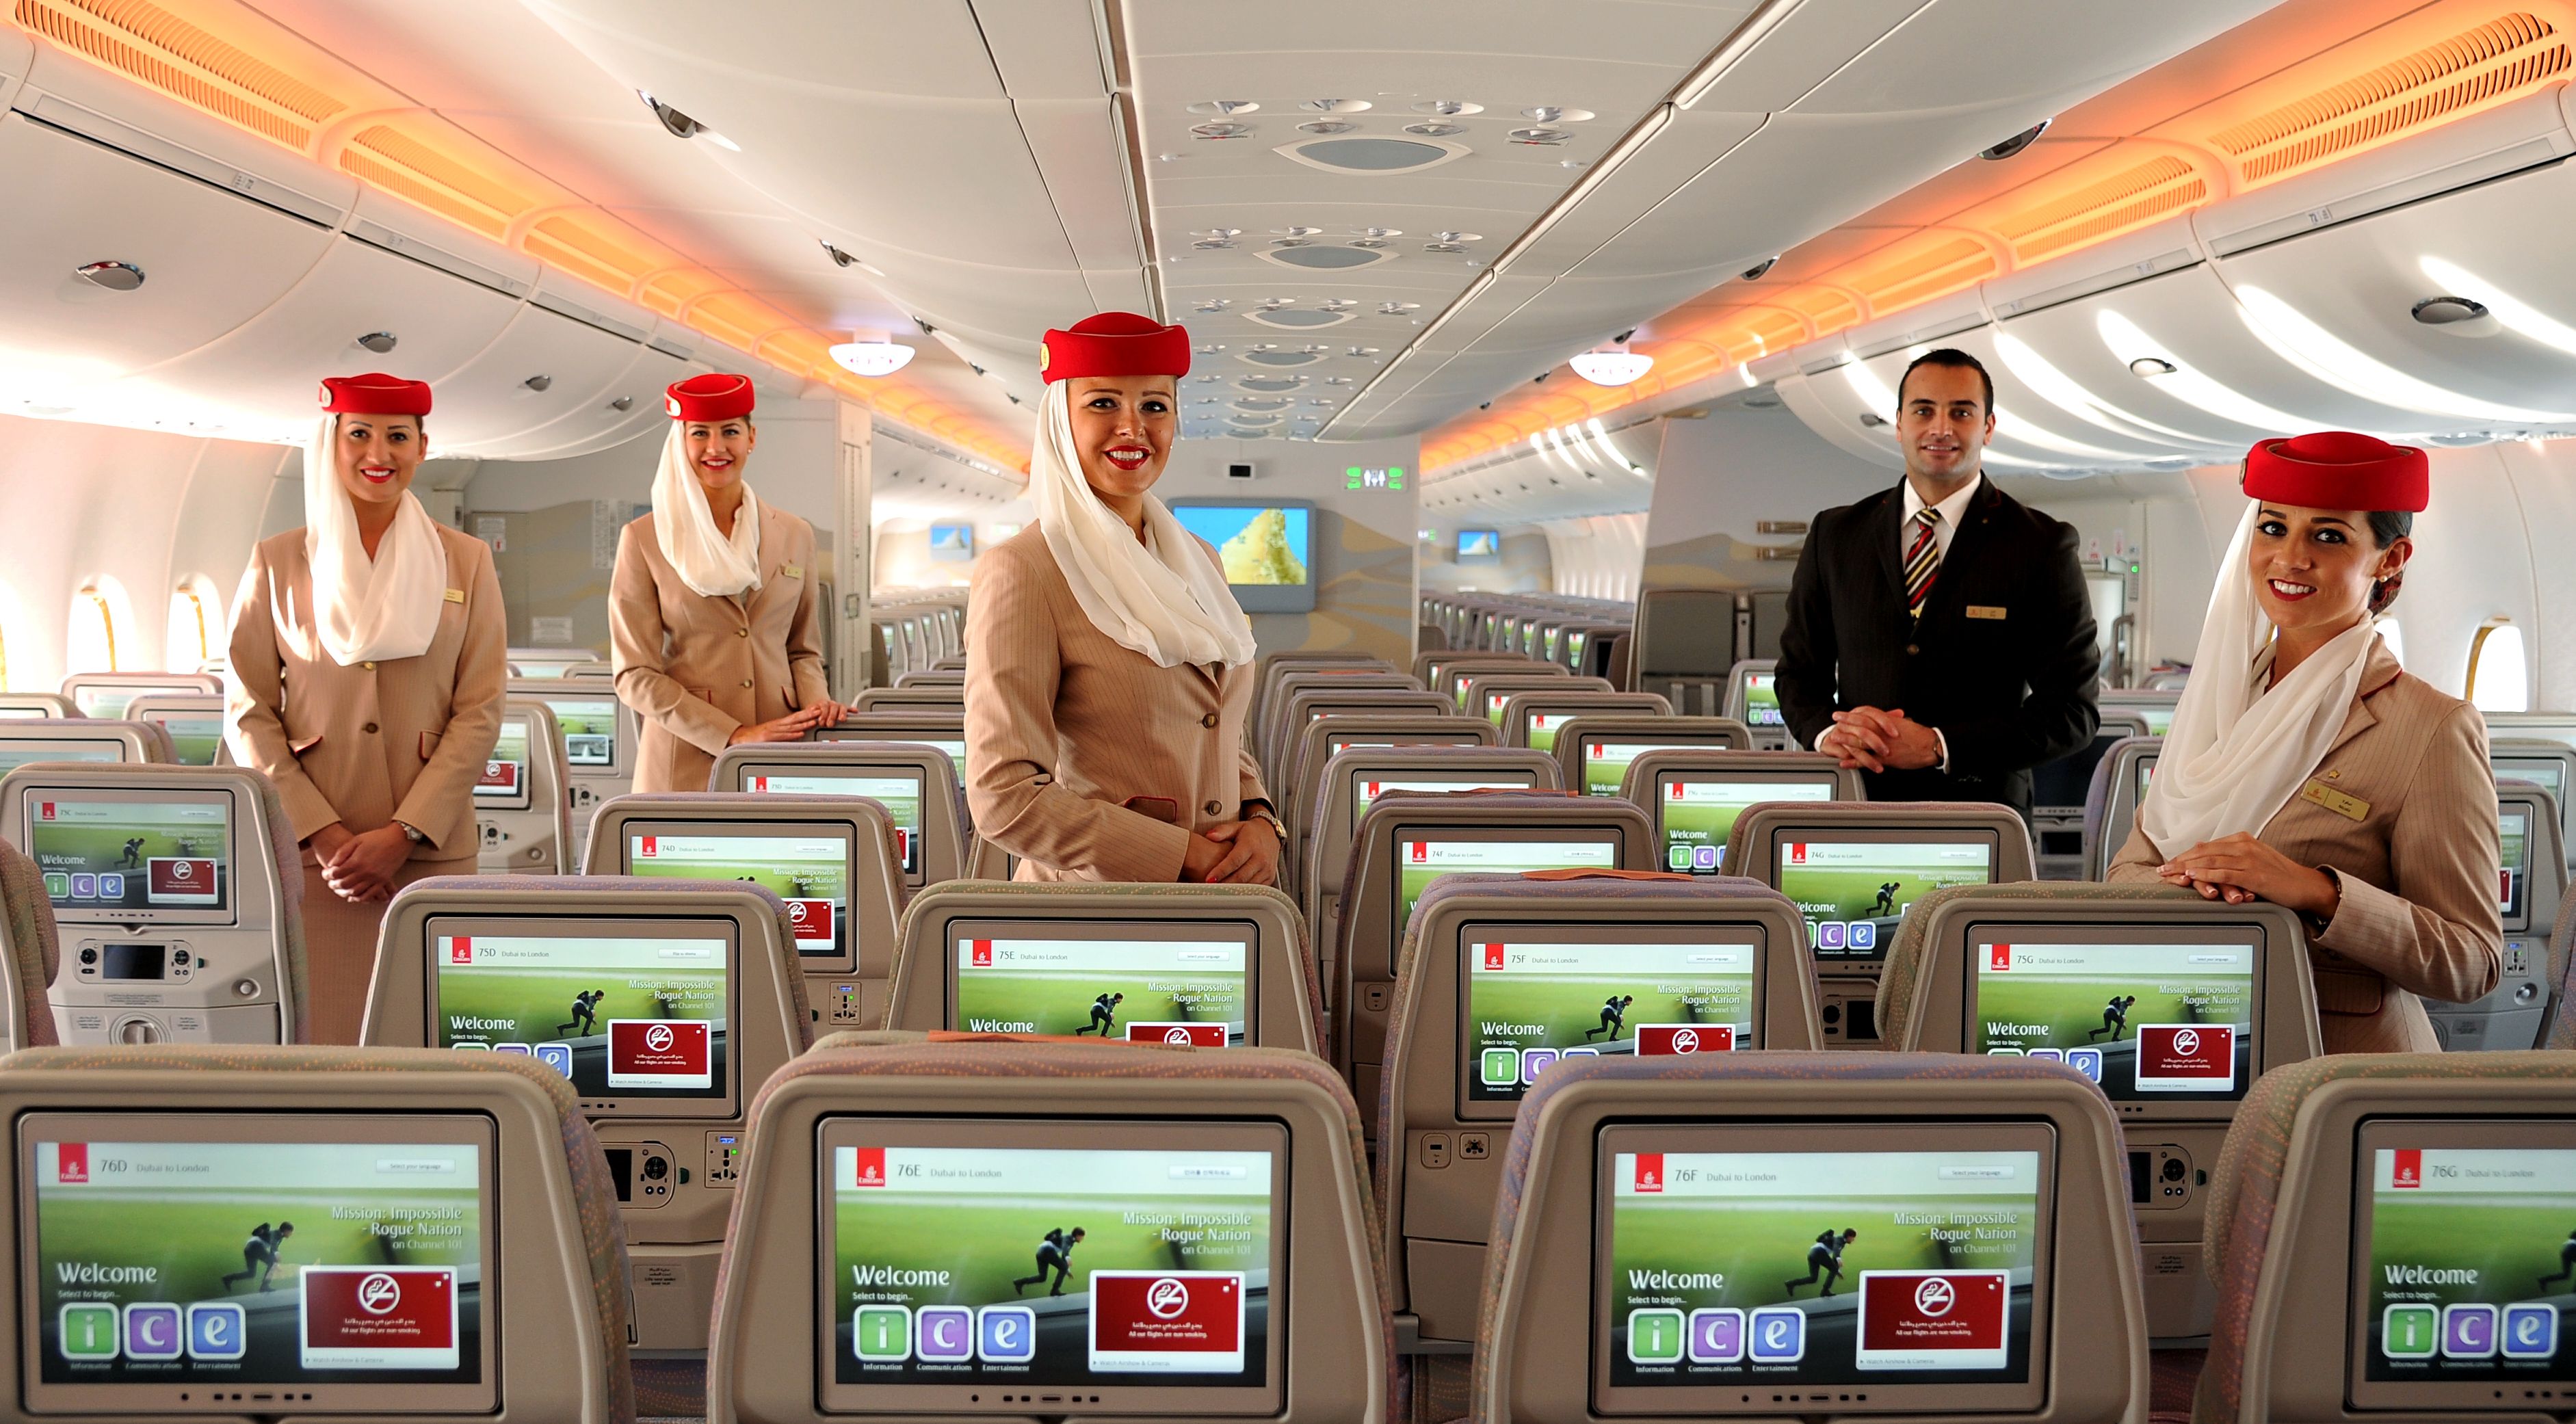 Emirates cabin crew onboard the aircraft